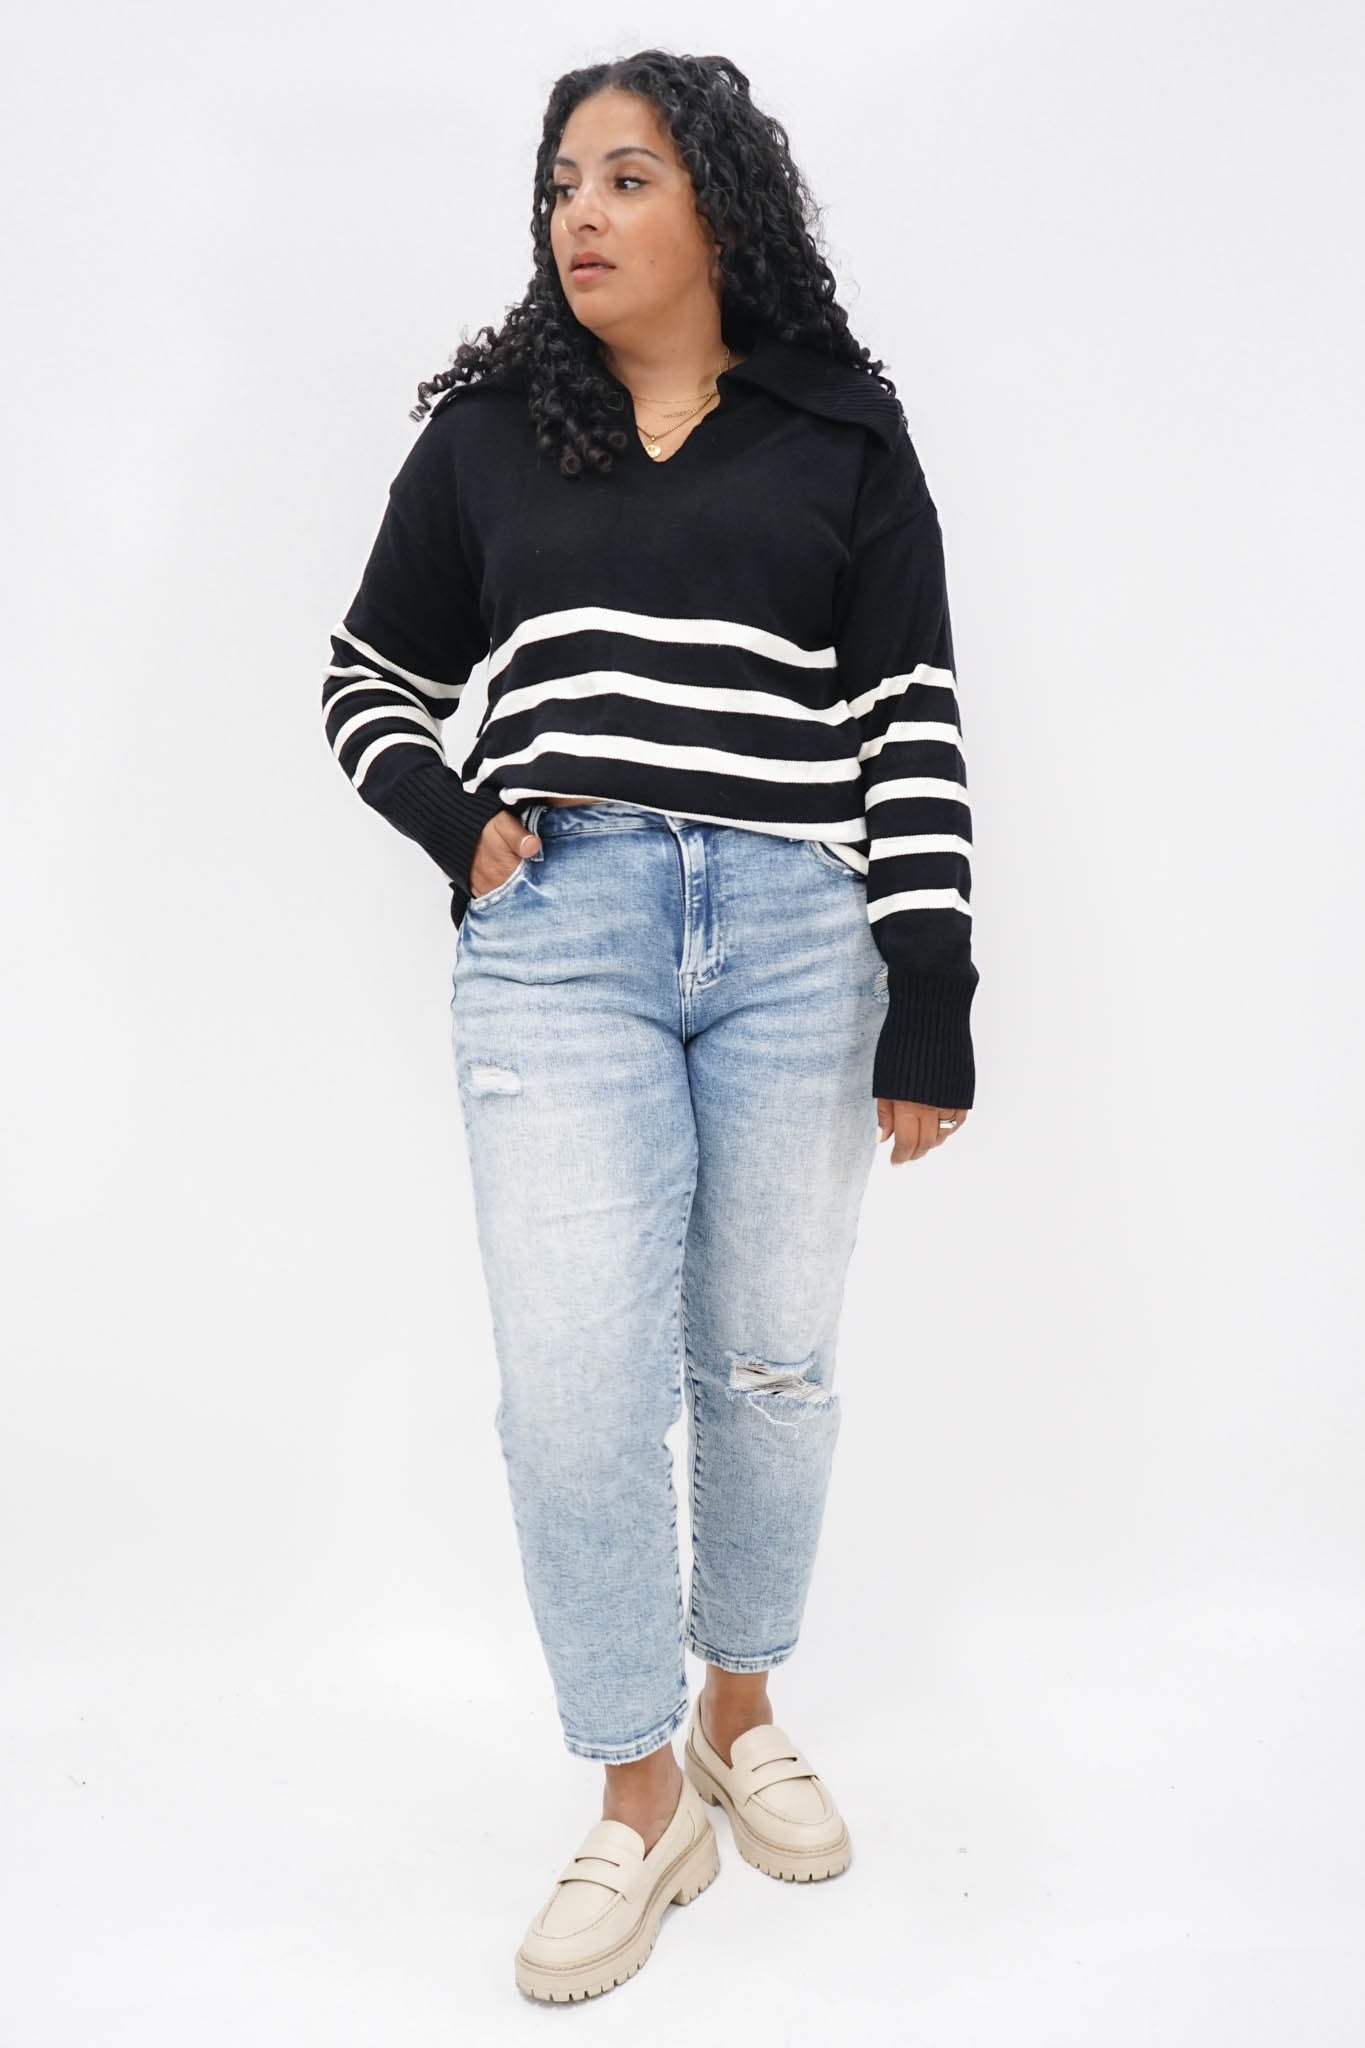 Campbell Striped Sweater